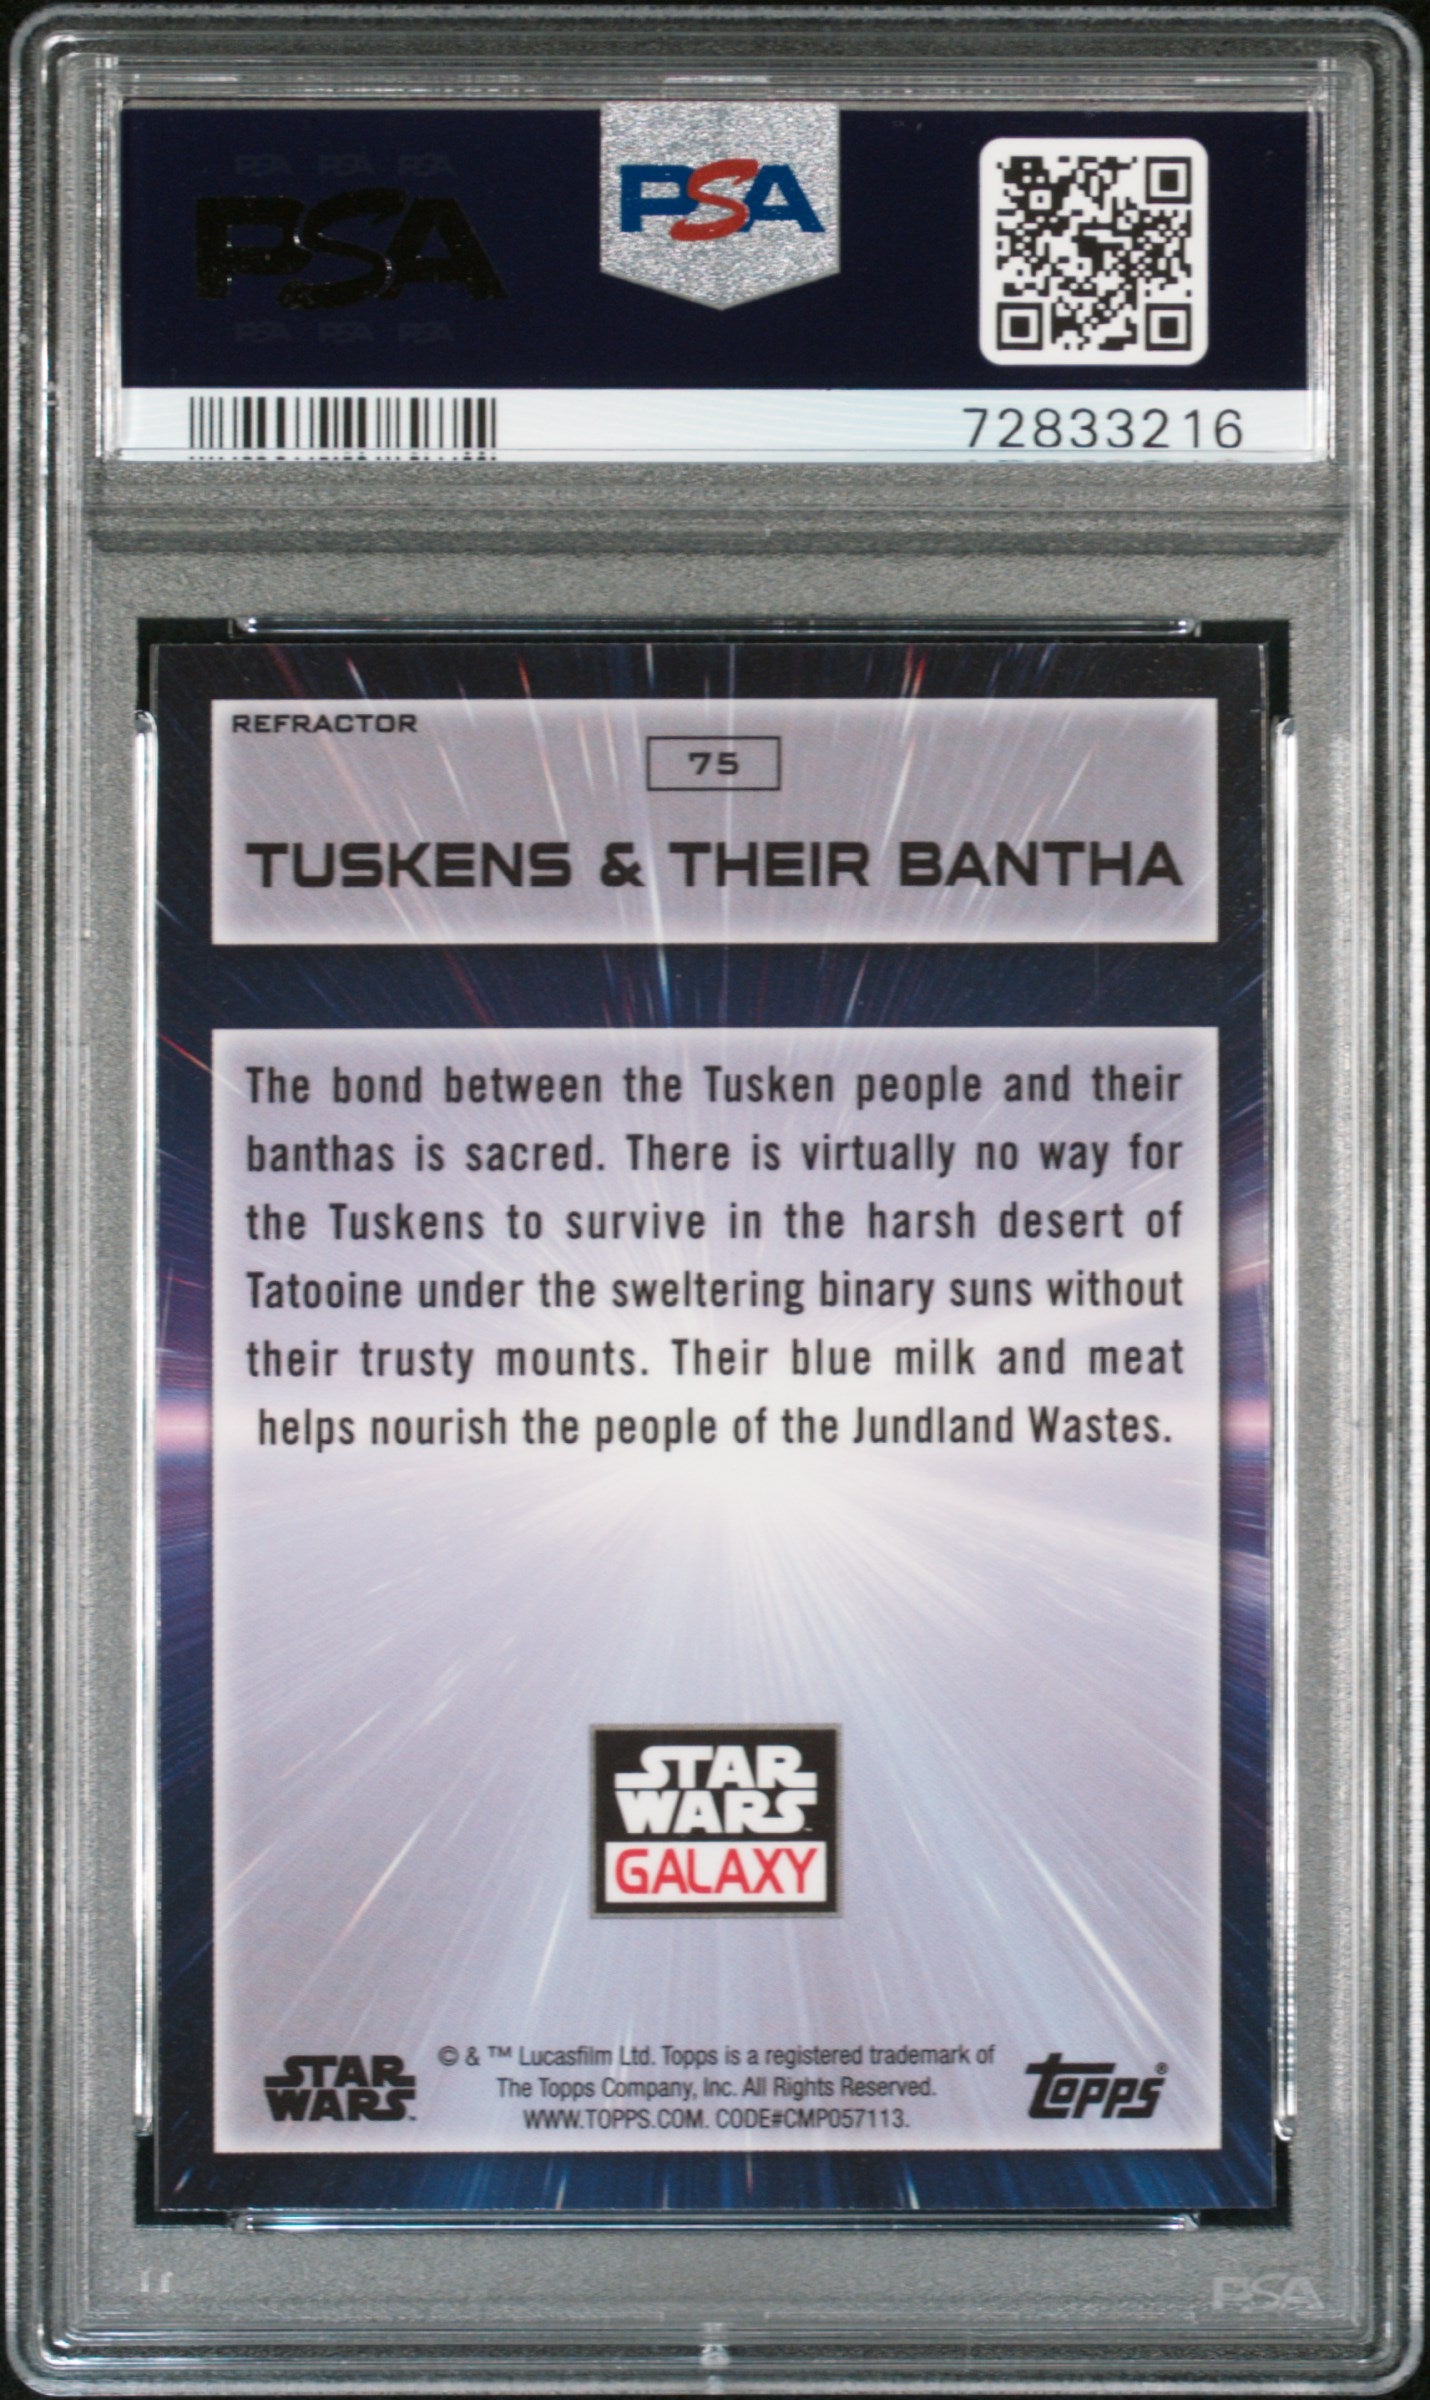 2022 Topps Chrome Star Wars Galaxy 75 Tuskens & Their Bantha Refractor Psa 9